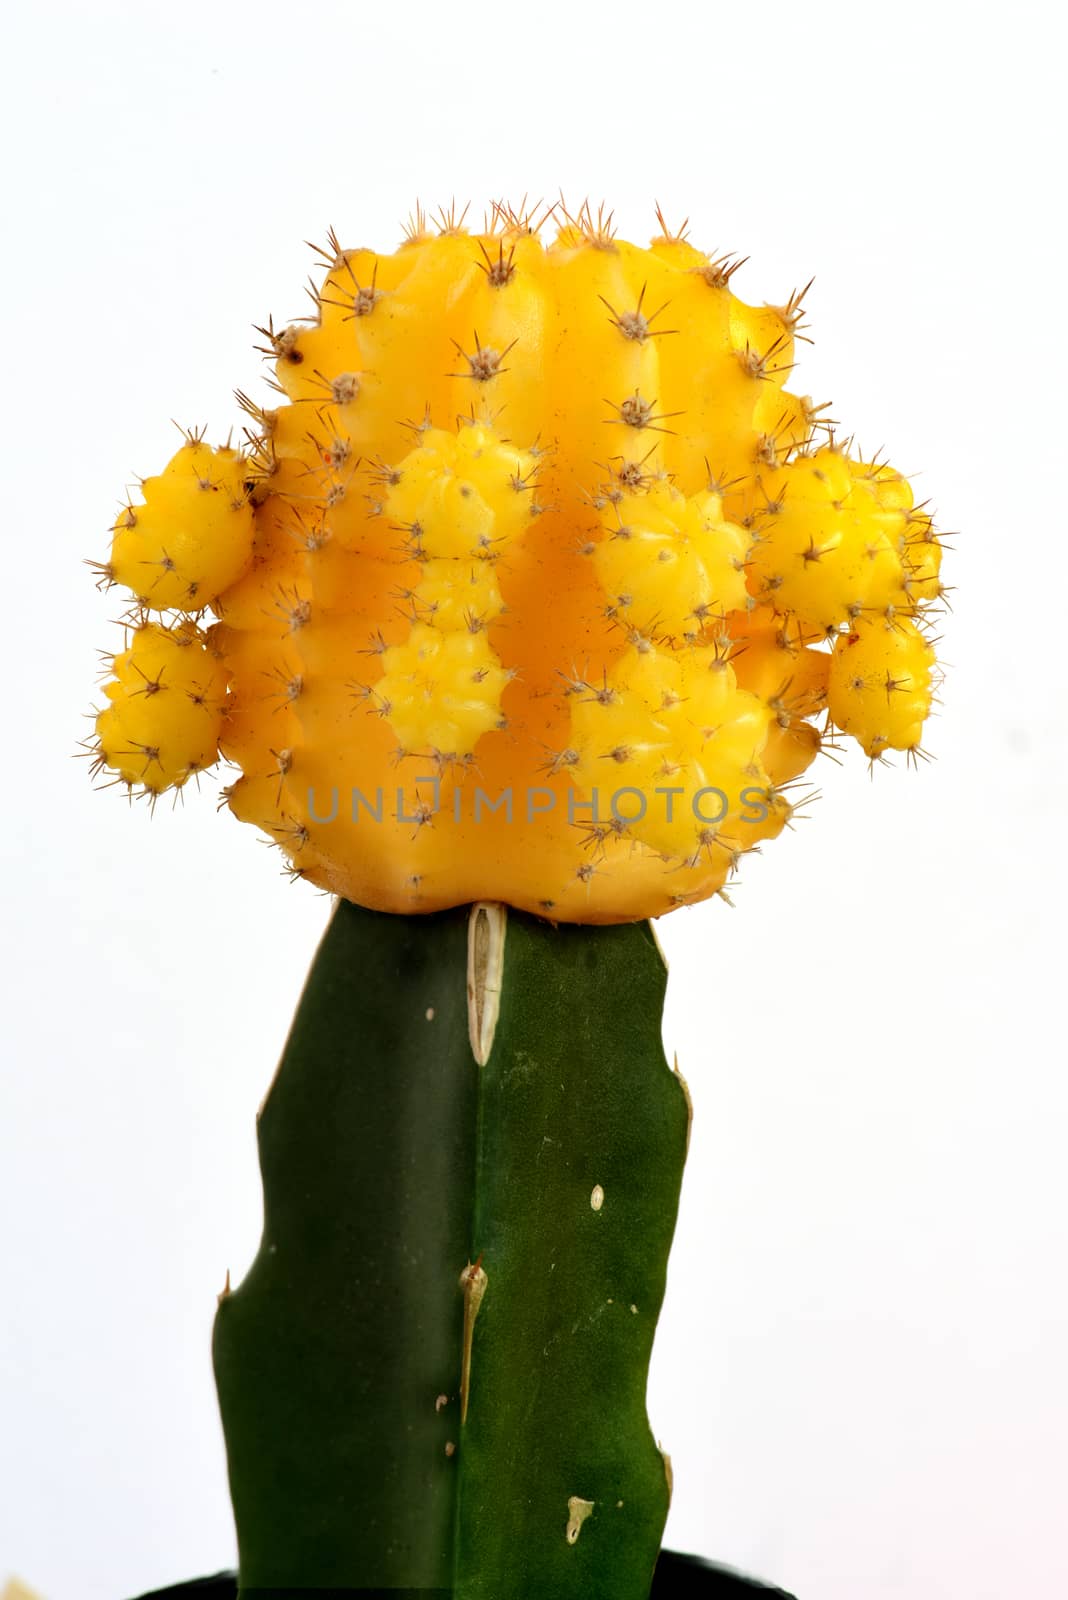 A small yellow cactus isolated in white background